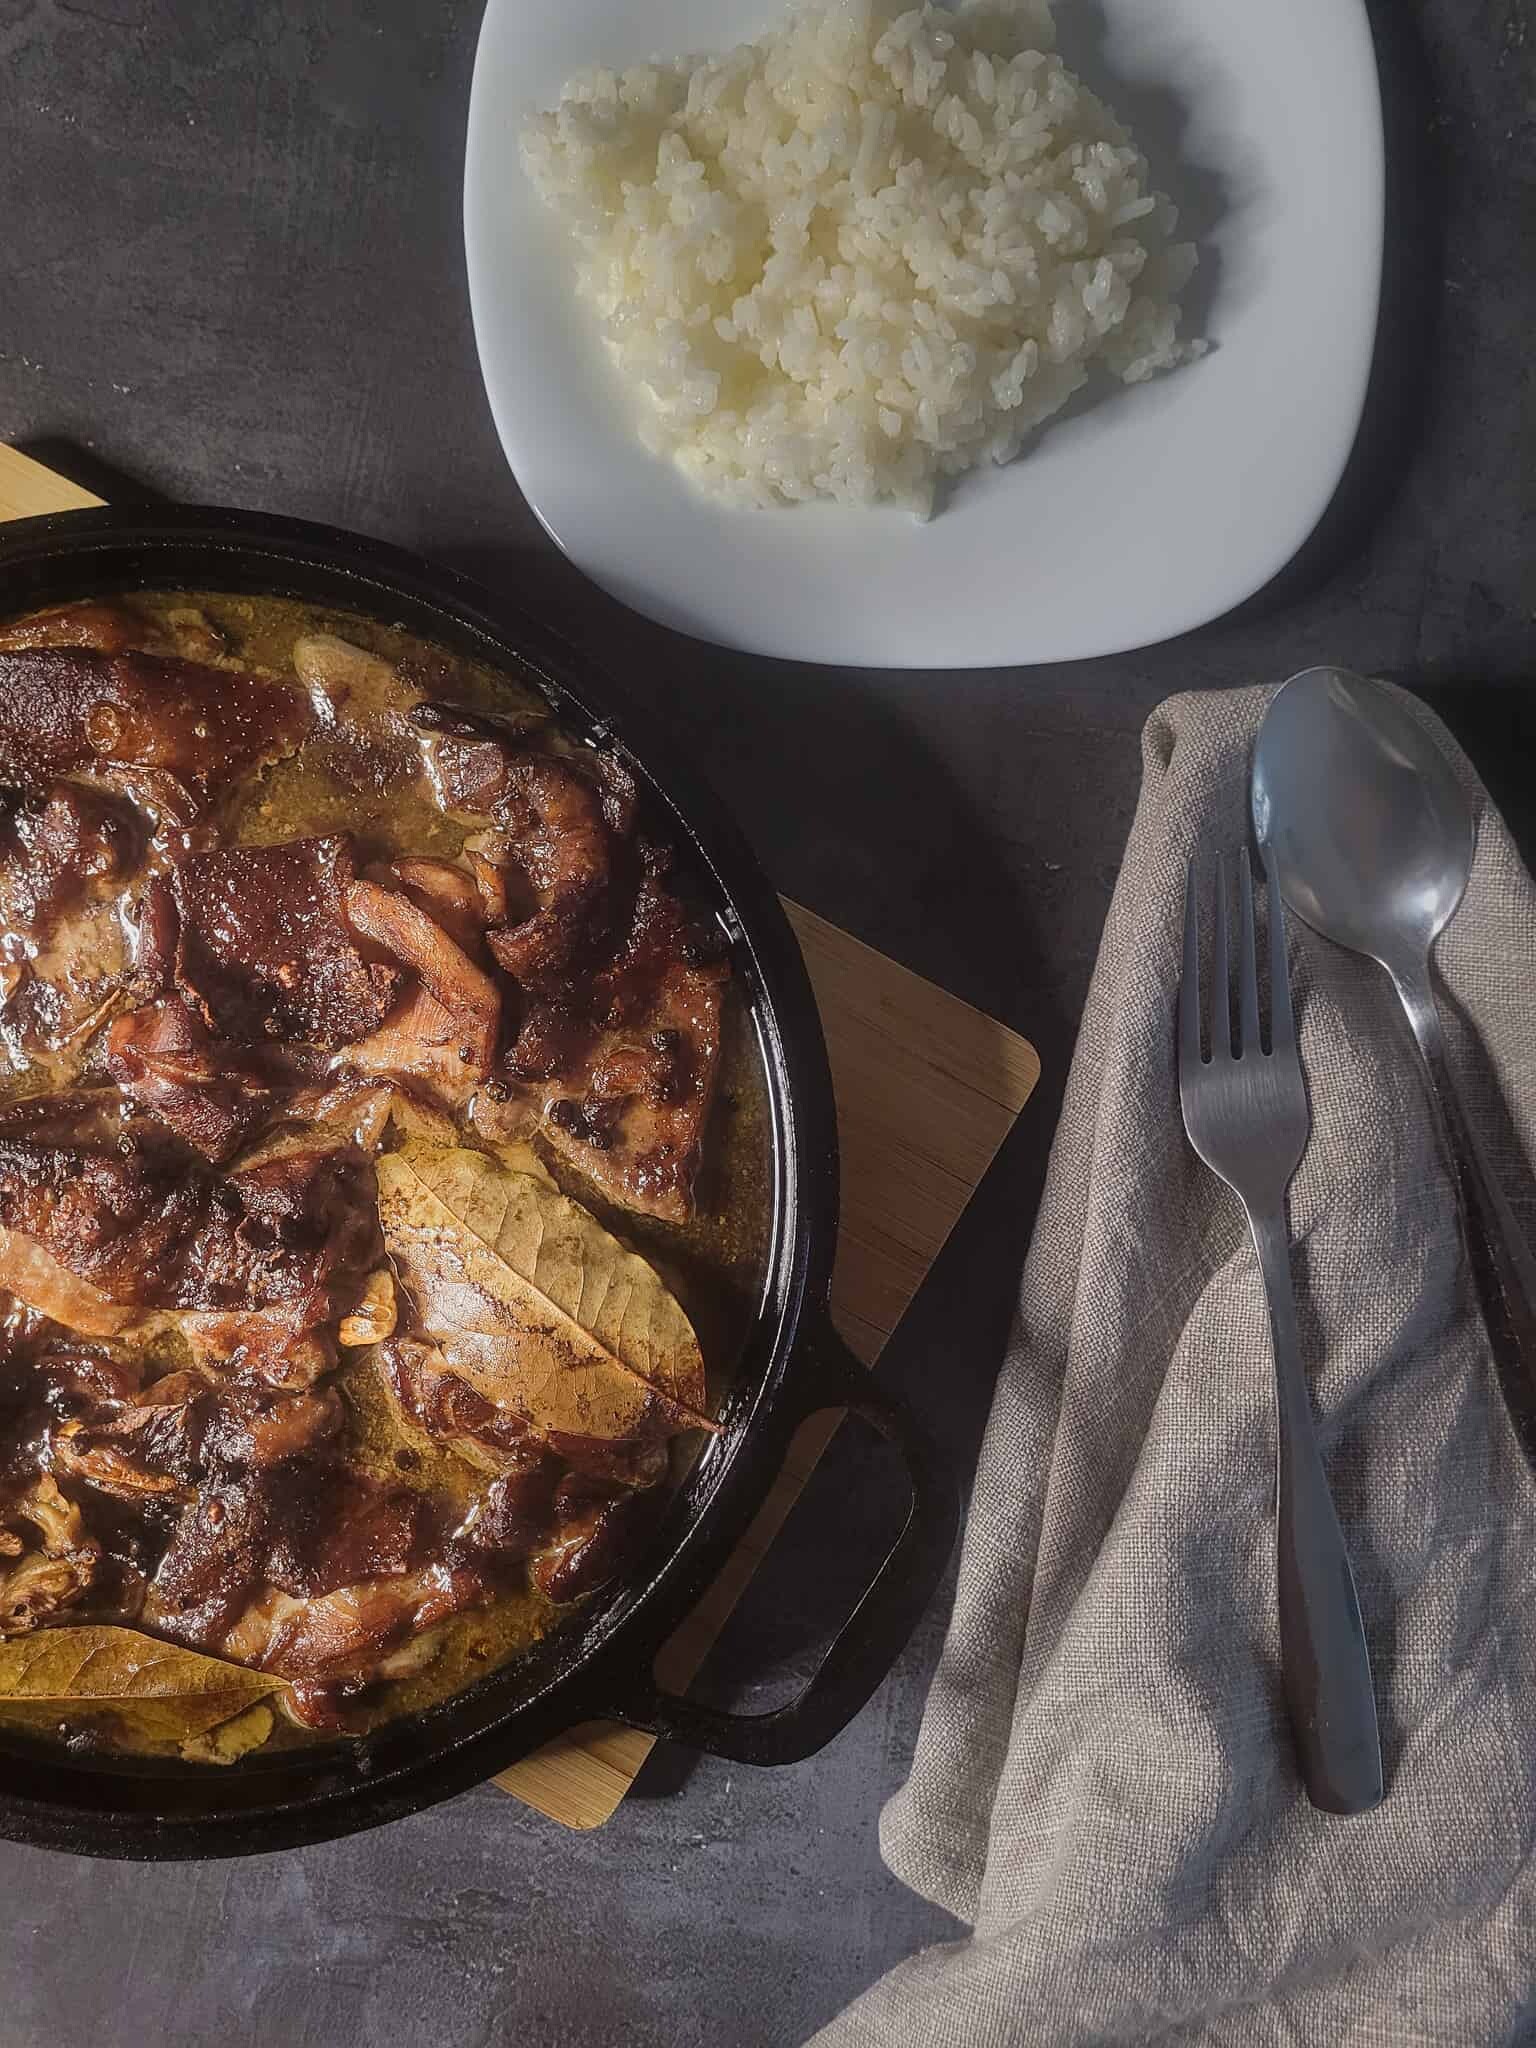 A cast iron full of chicken adobo next to rice and silverware